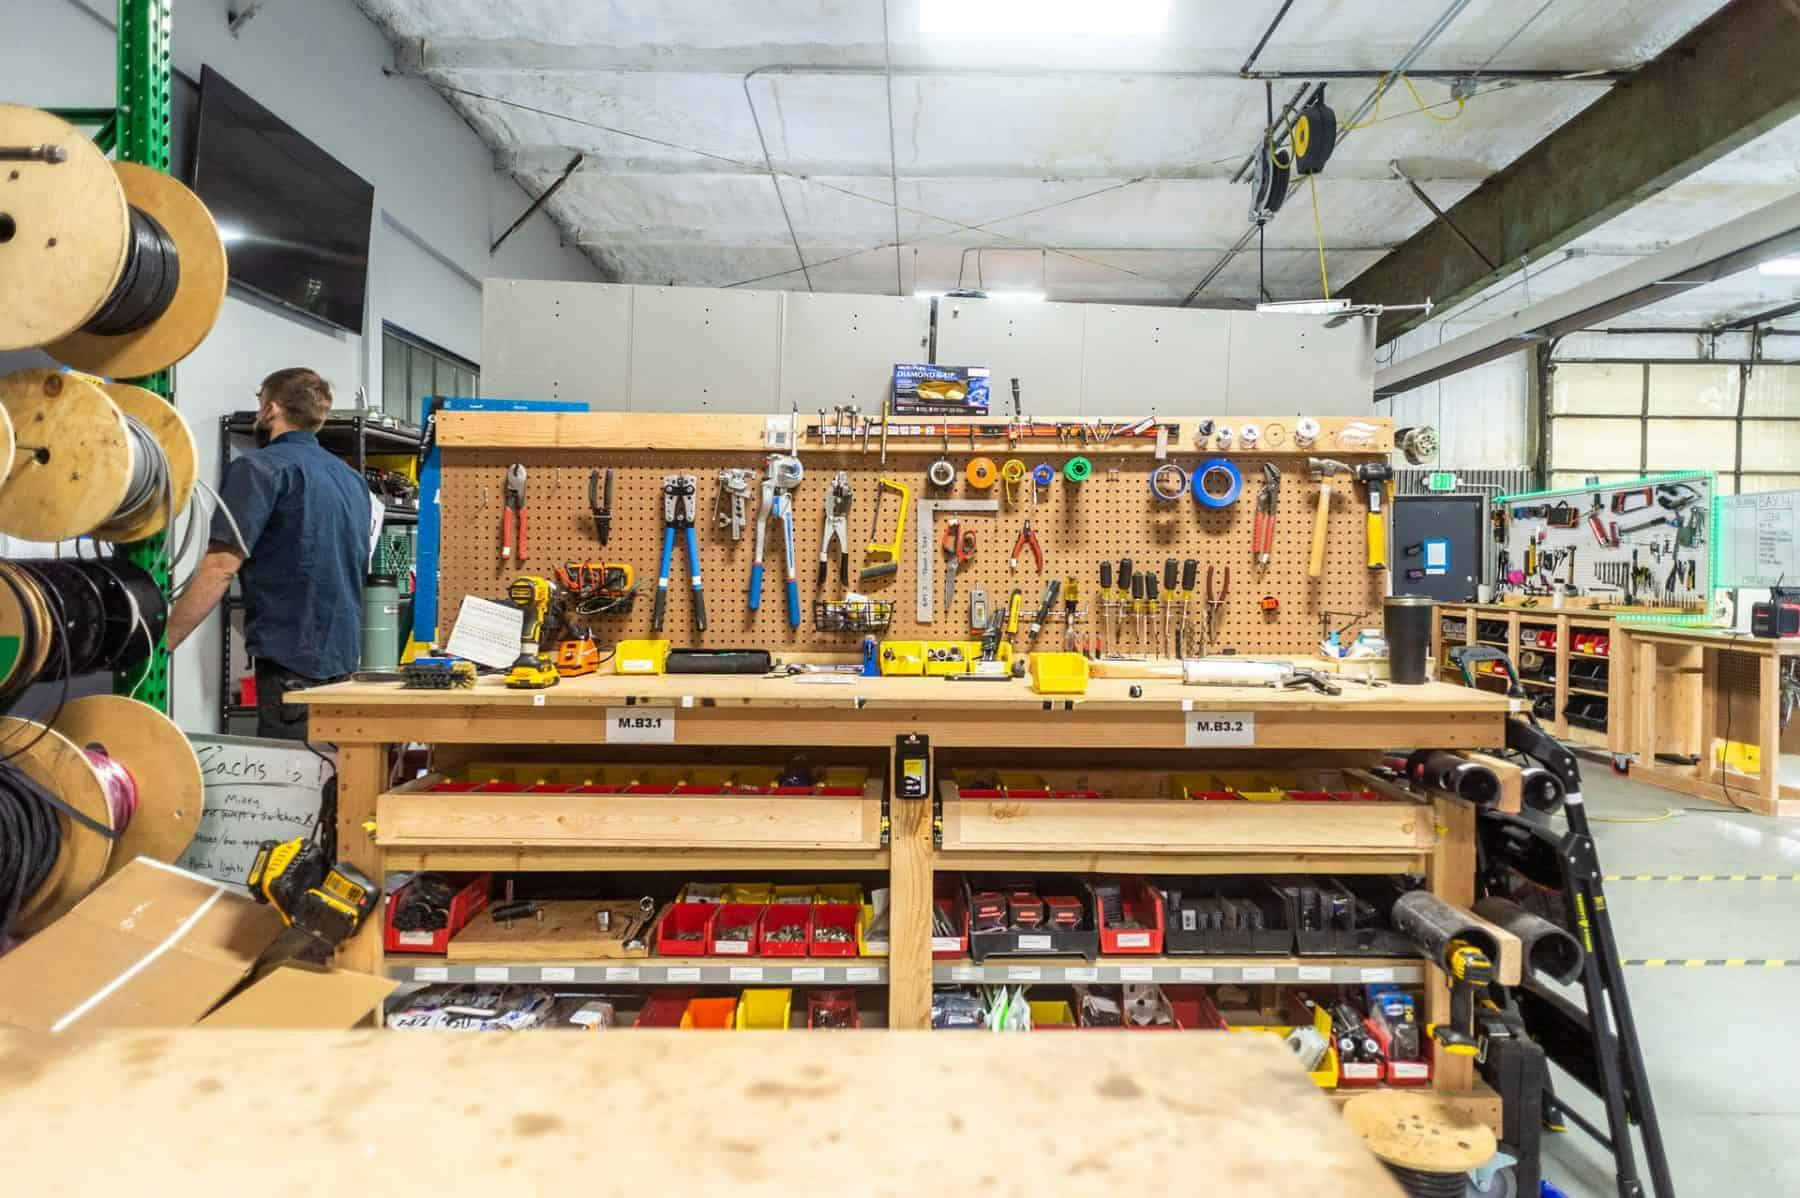 A workbench in a manufacturing shop.